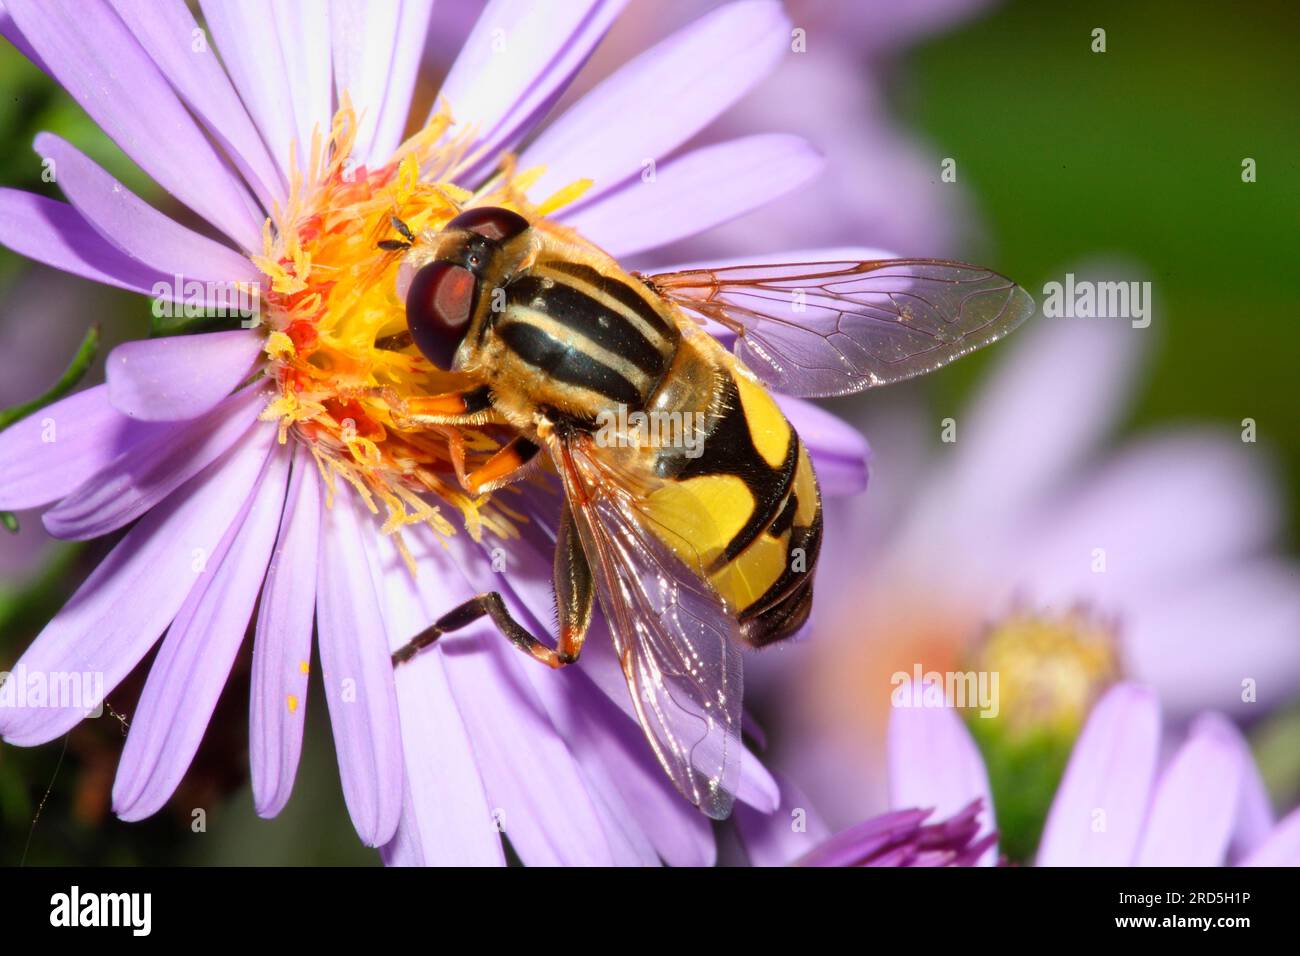 Dangling sunlover (Helophilus pendulus) in autunno aster (Aster dumosus), estate hoverfly, fly, autunno aster, cuscino aster Foto Stock